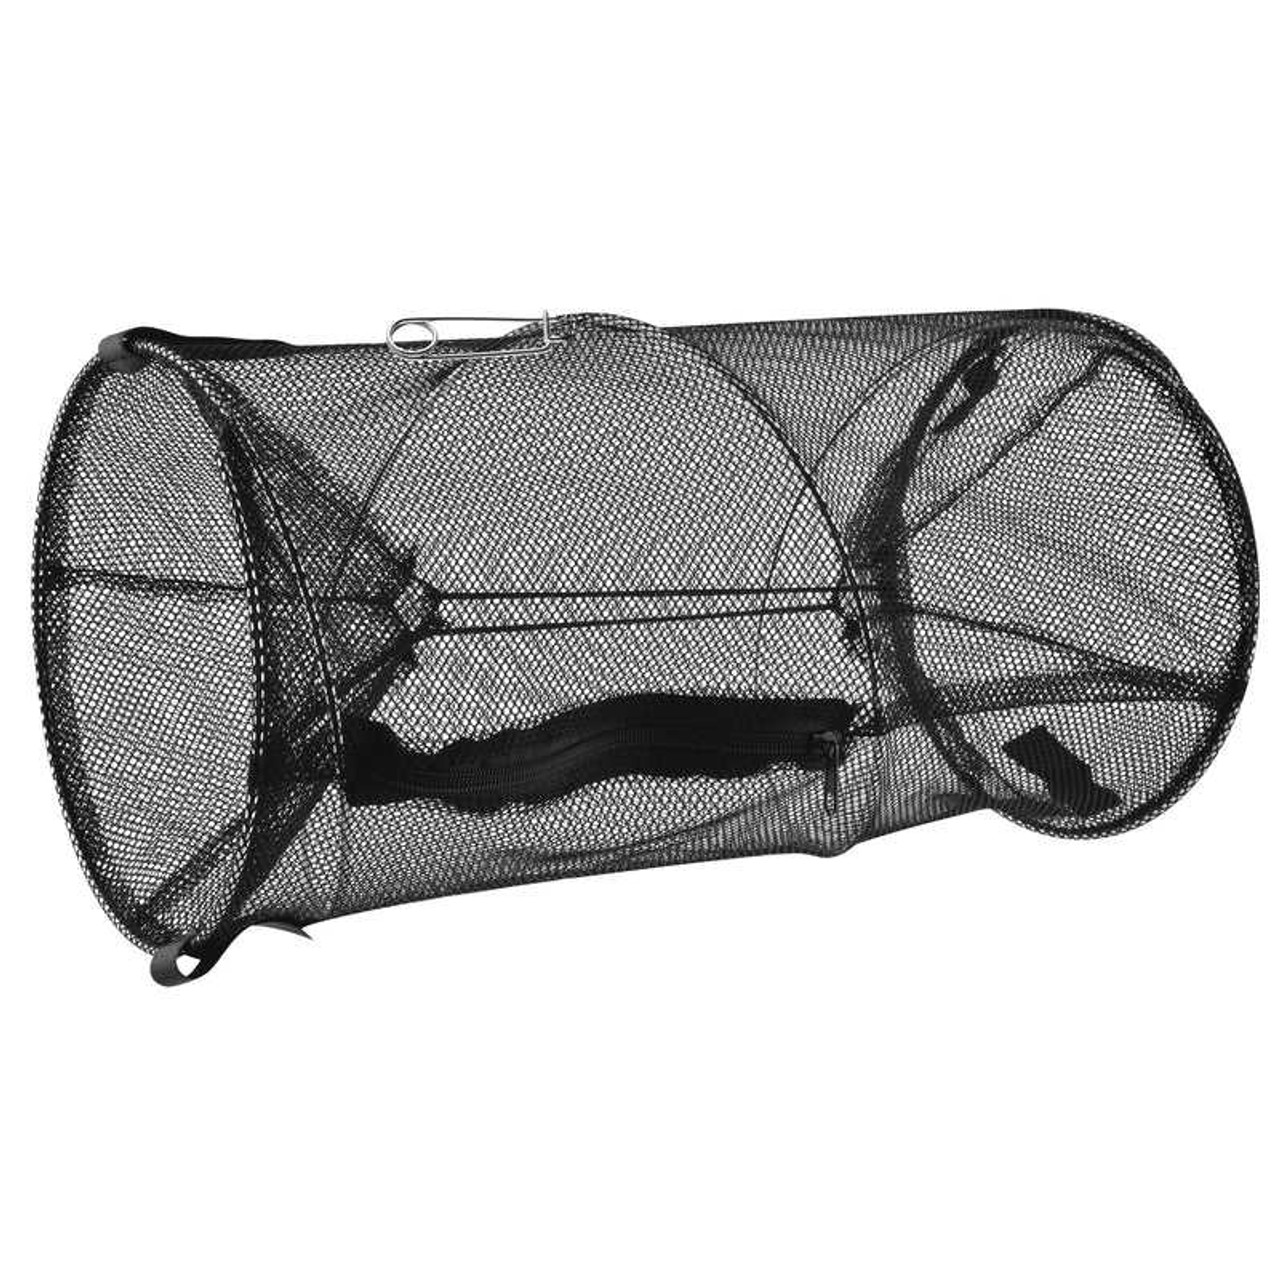 South Bend Collapsible Minnow Trap FISHING